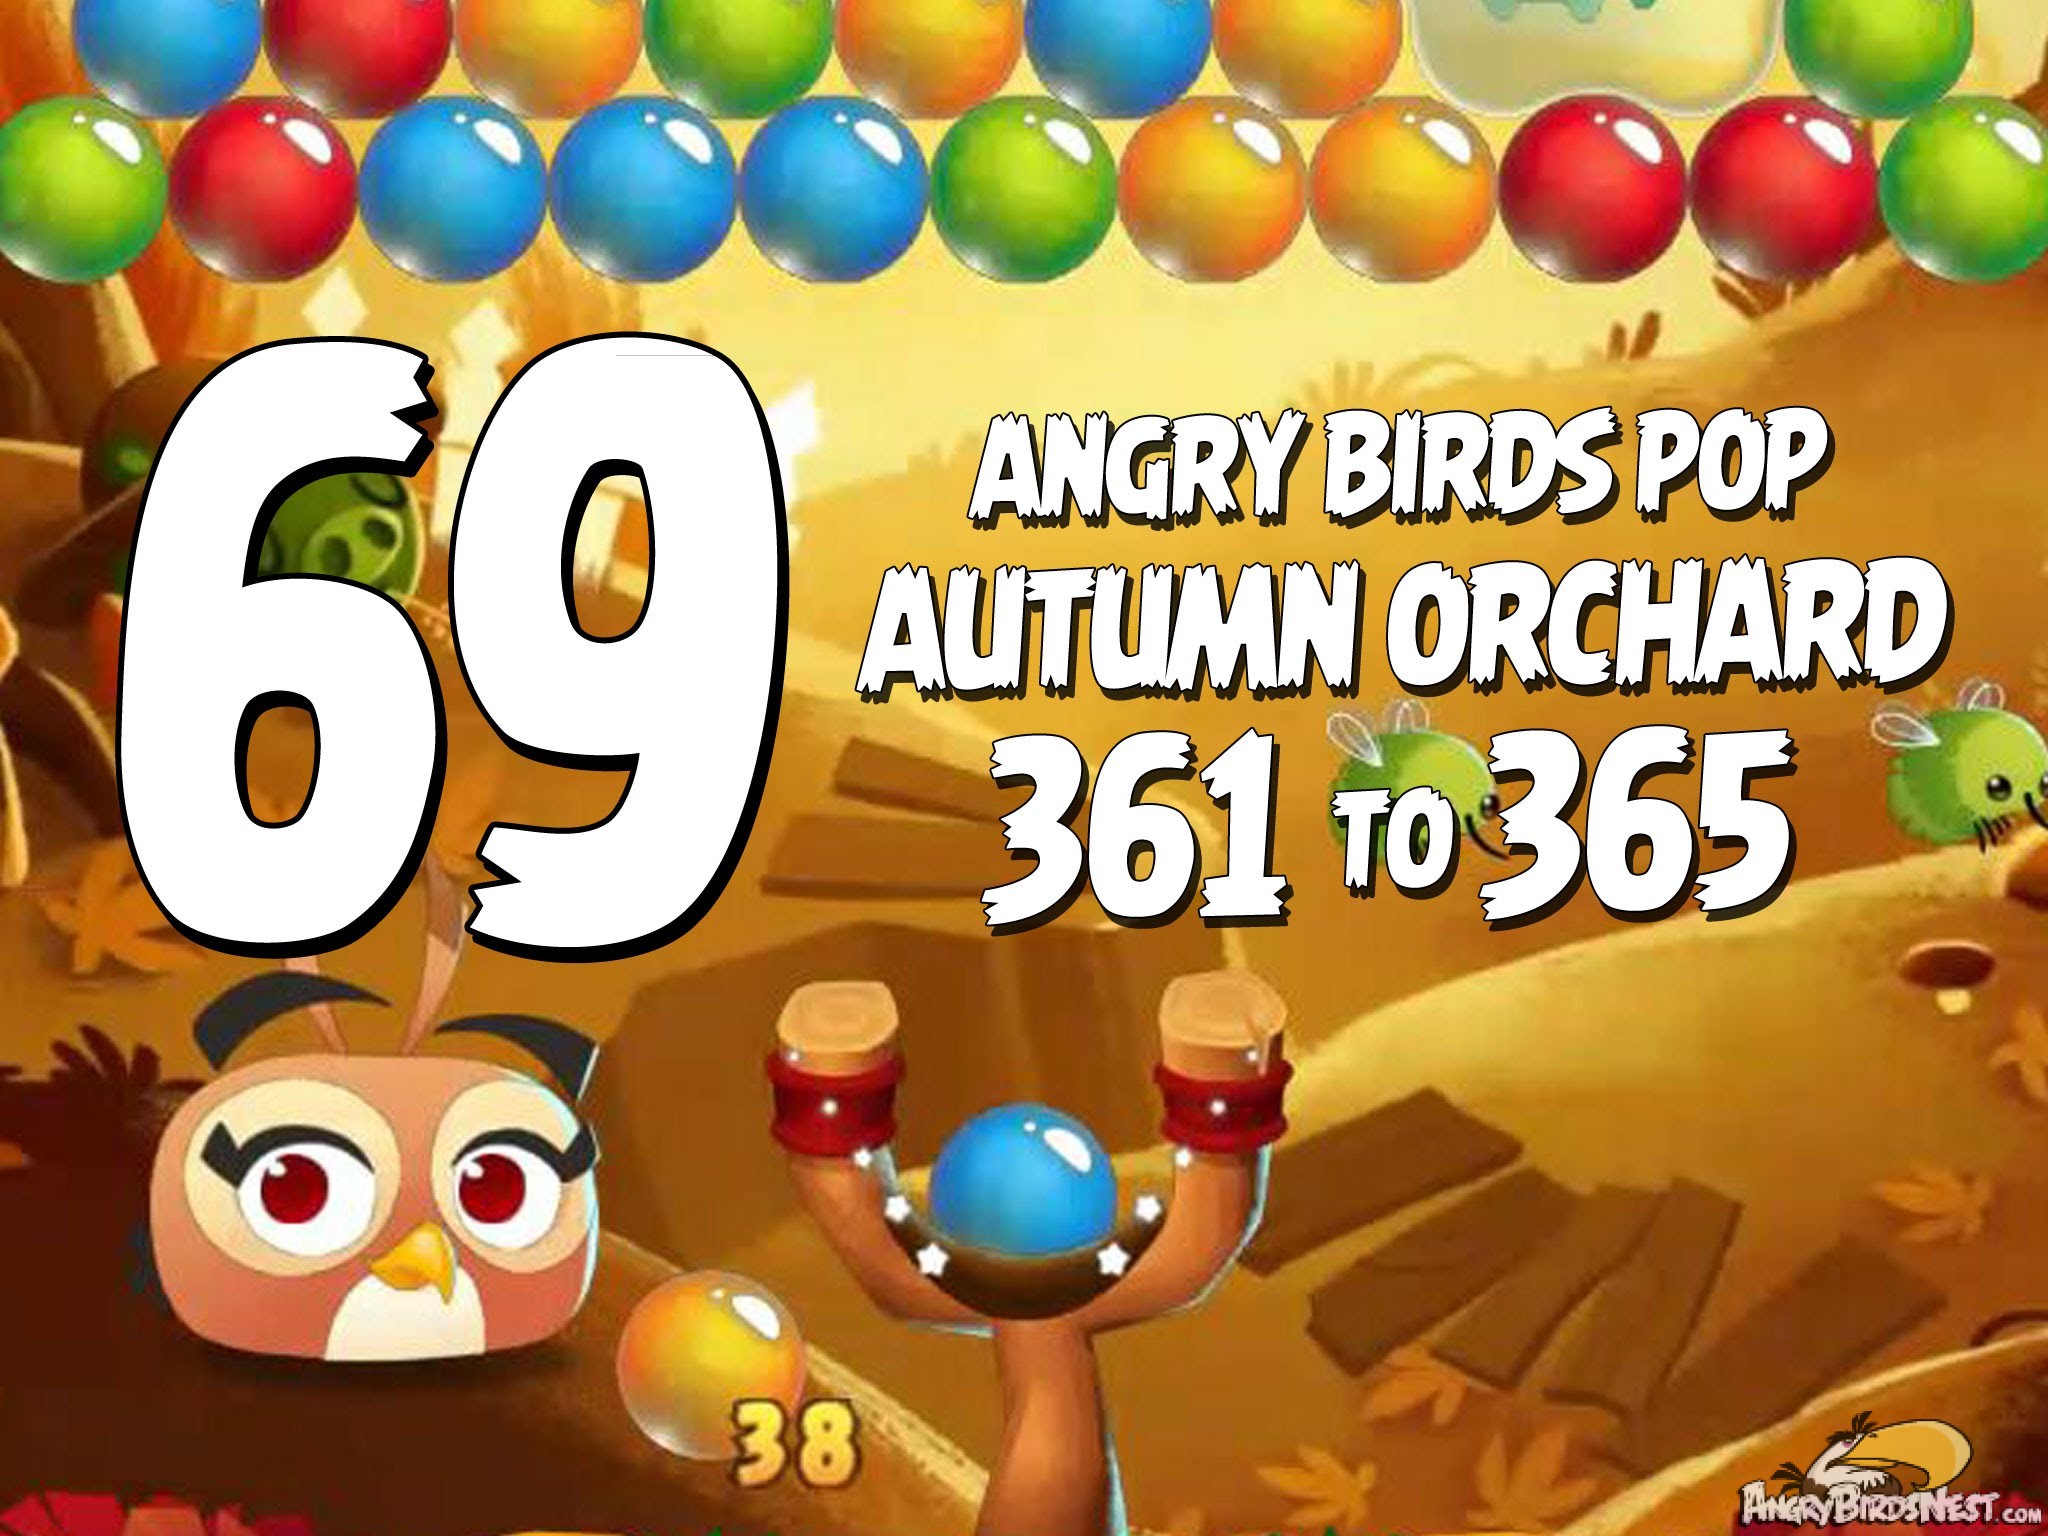 Angry Birds Pop Part 69 - Autumn Orchard